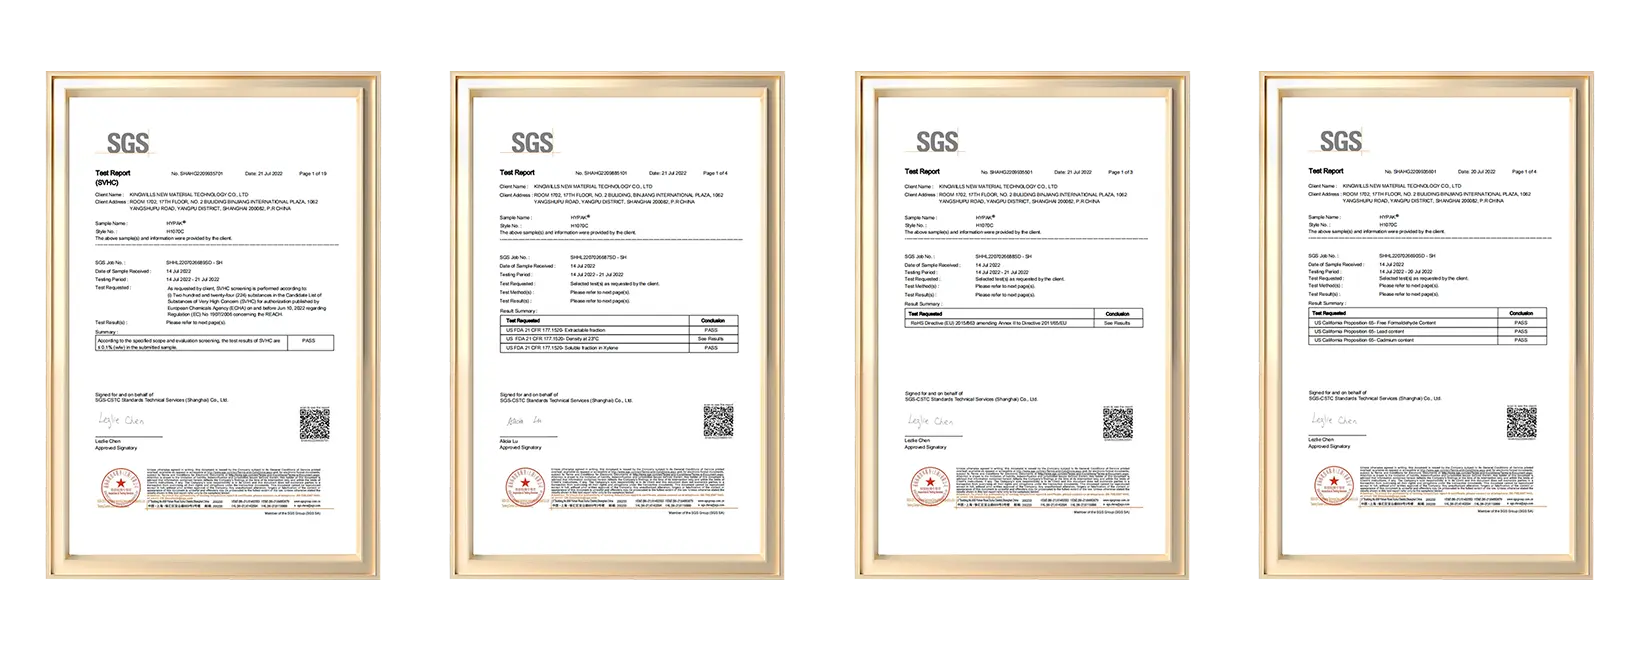 Hypak™ materials passed the SGS test